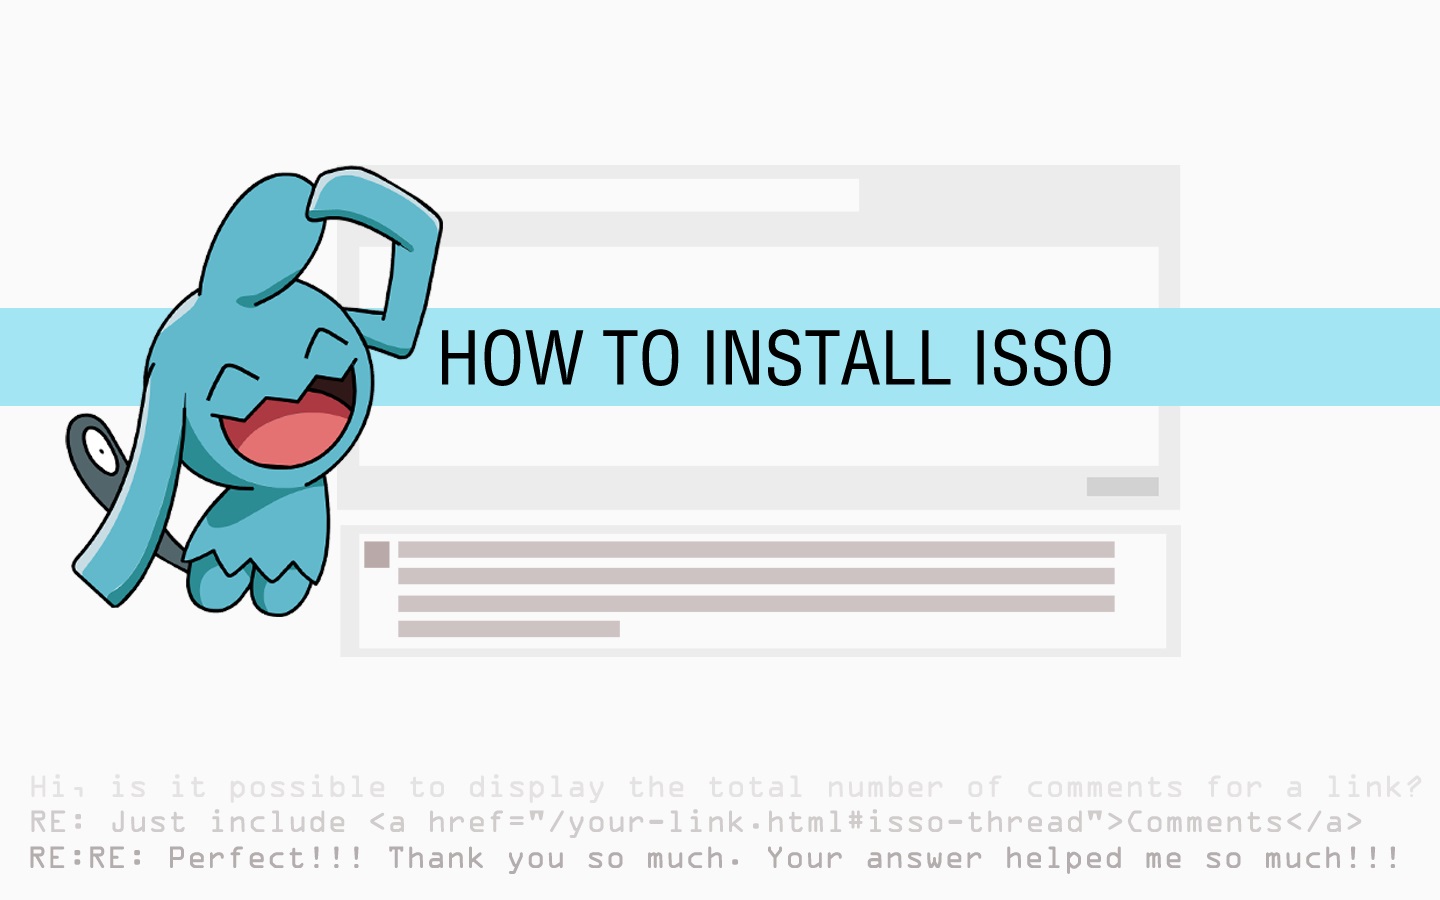 How to Install Isso Commenting Server on Ubuntu 16.04